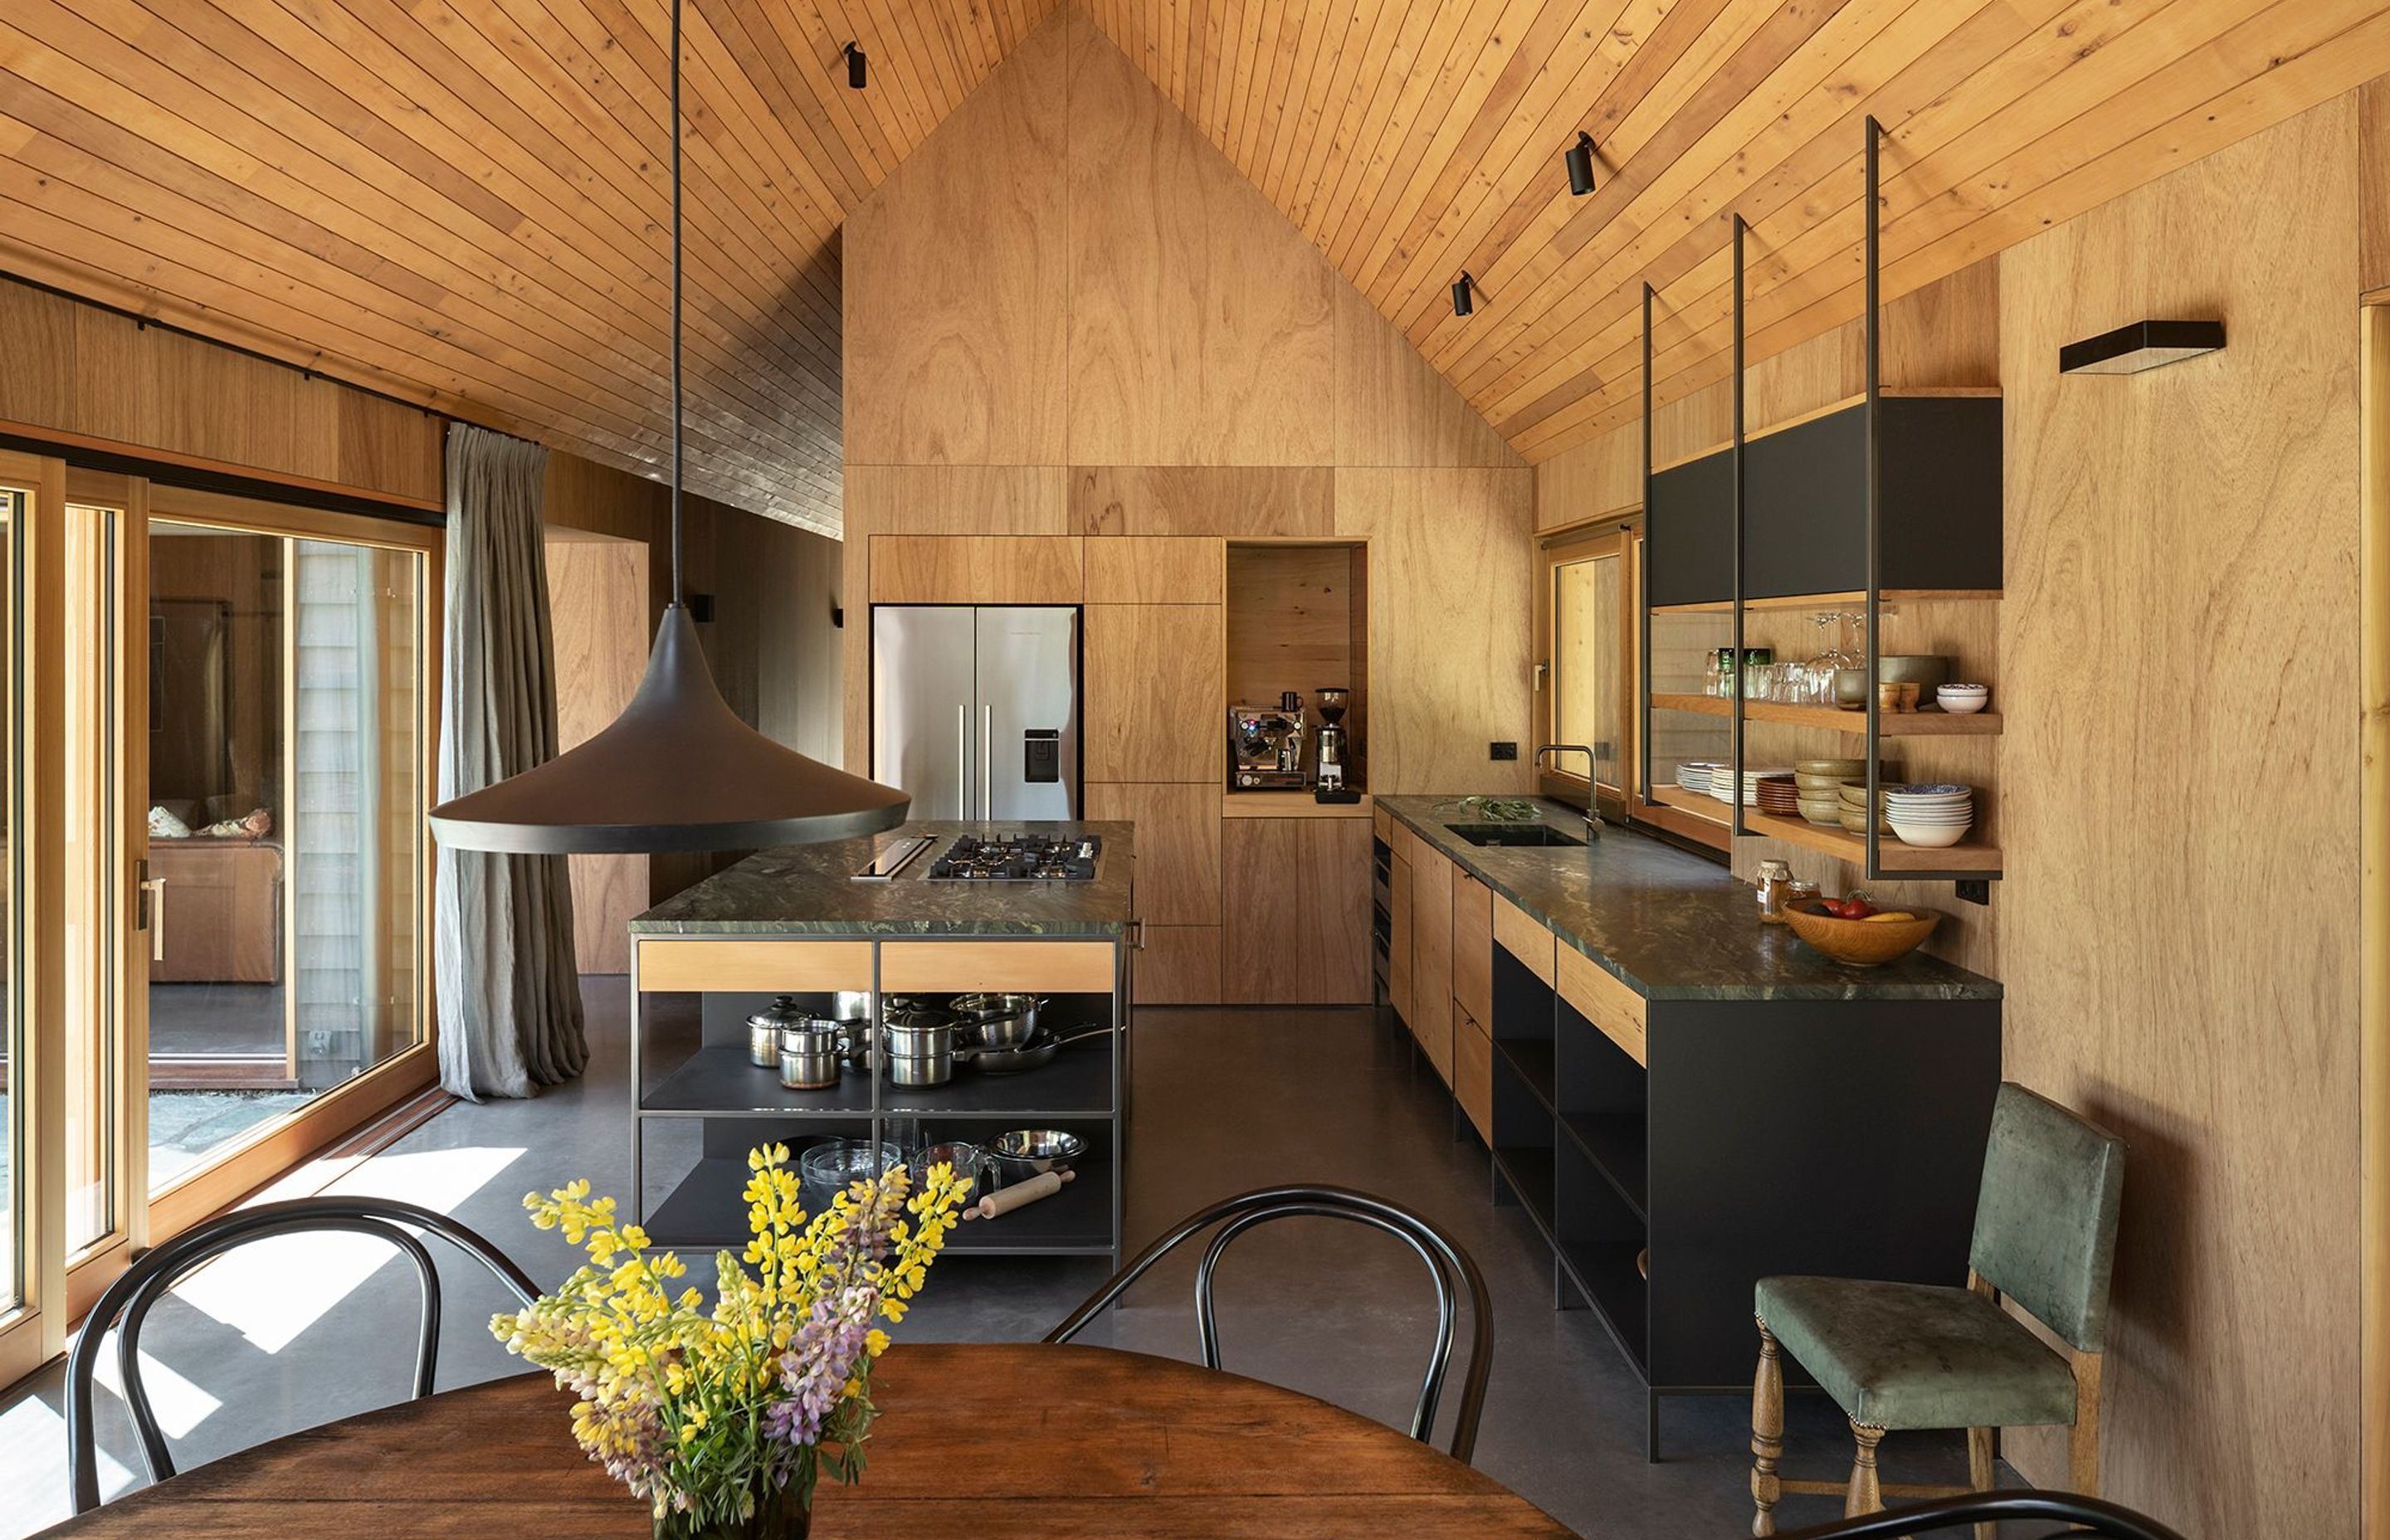 The open-plan kitchen has a wall of plywood cabinetry and an island and bench constructed in mild steel and recycled rimu, with a striking verde marble benchtop, like pounamu.